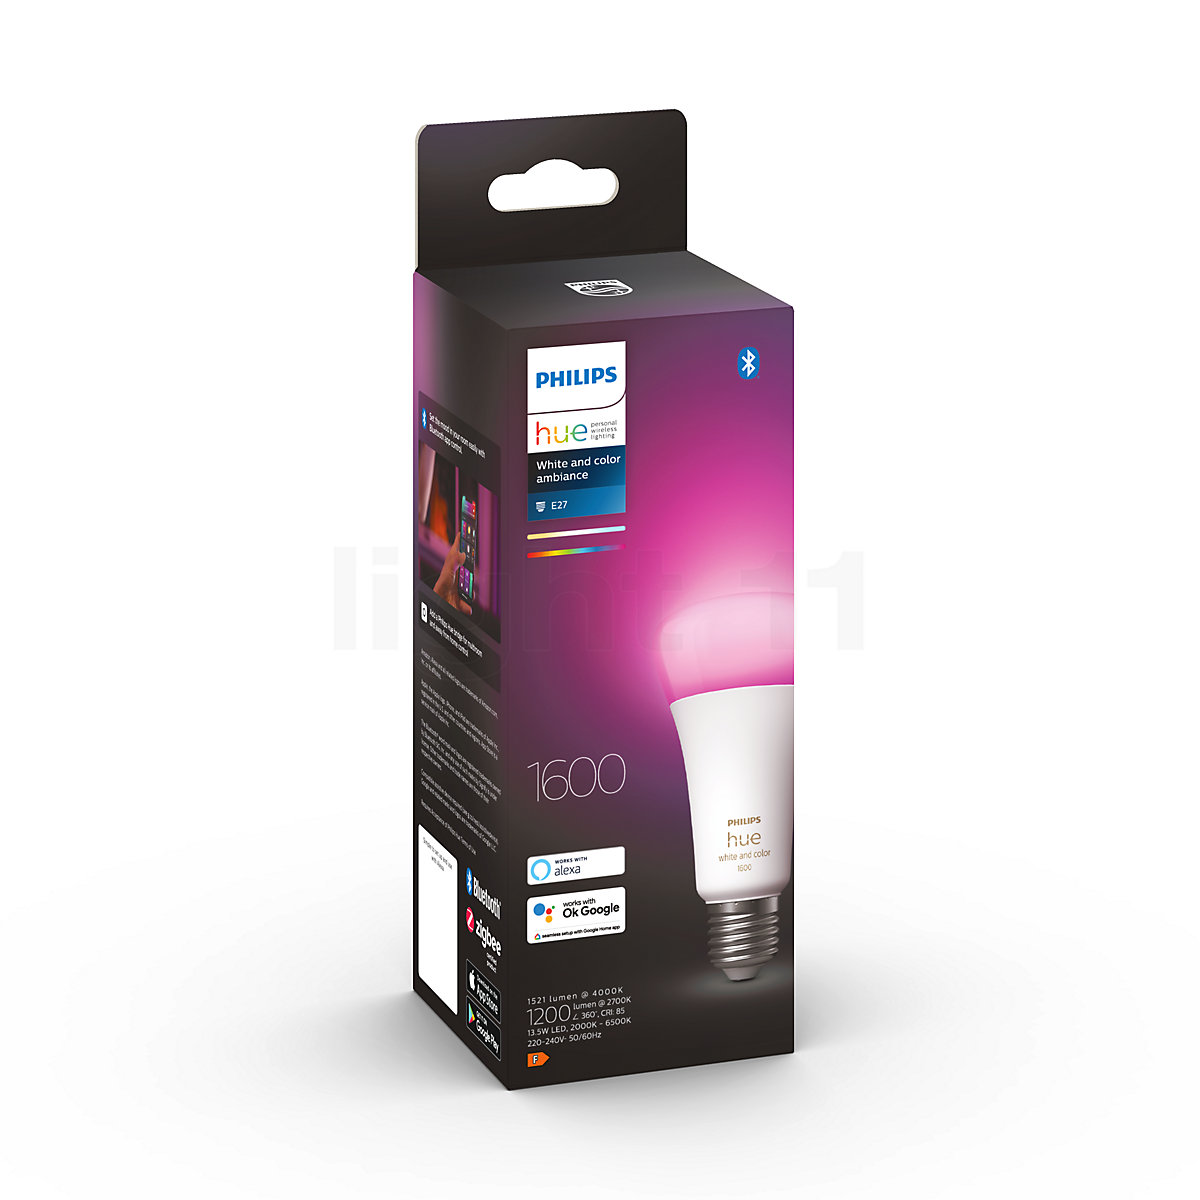 Buy Philips Hue And Color Ambiance E27 LED 1200 lm at